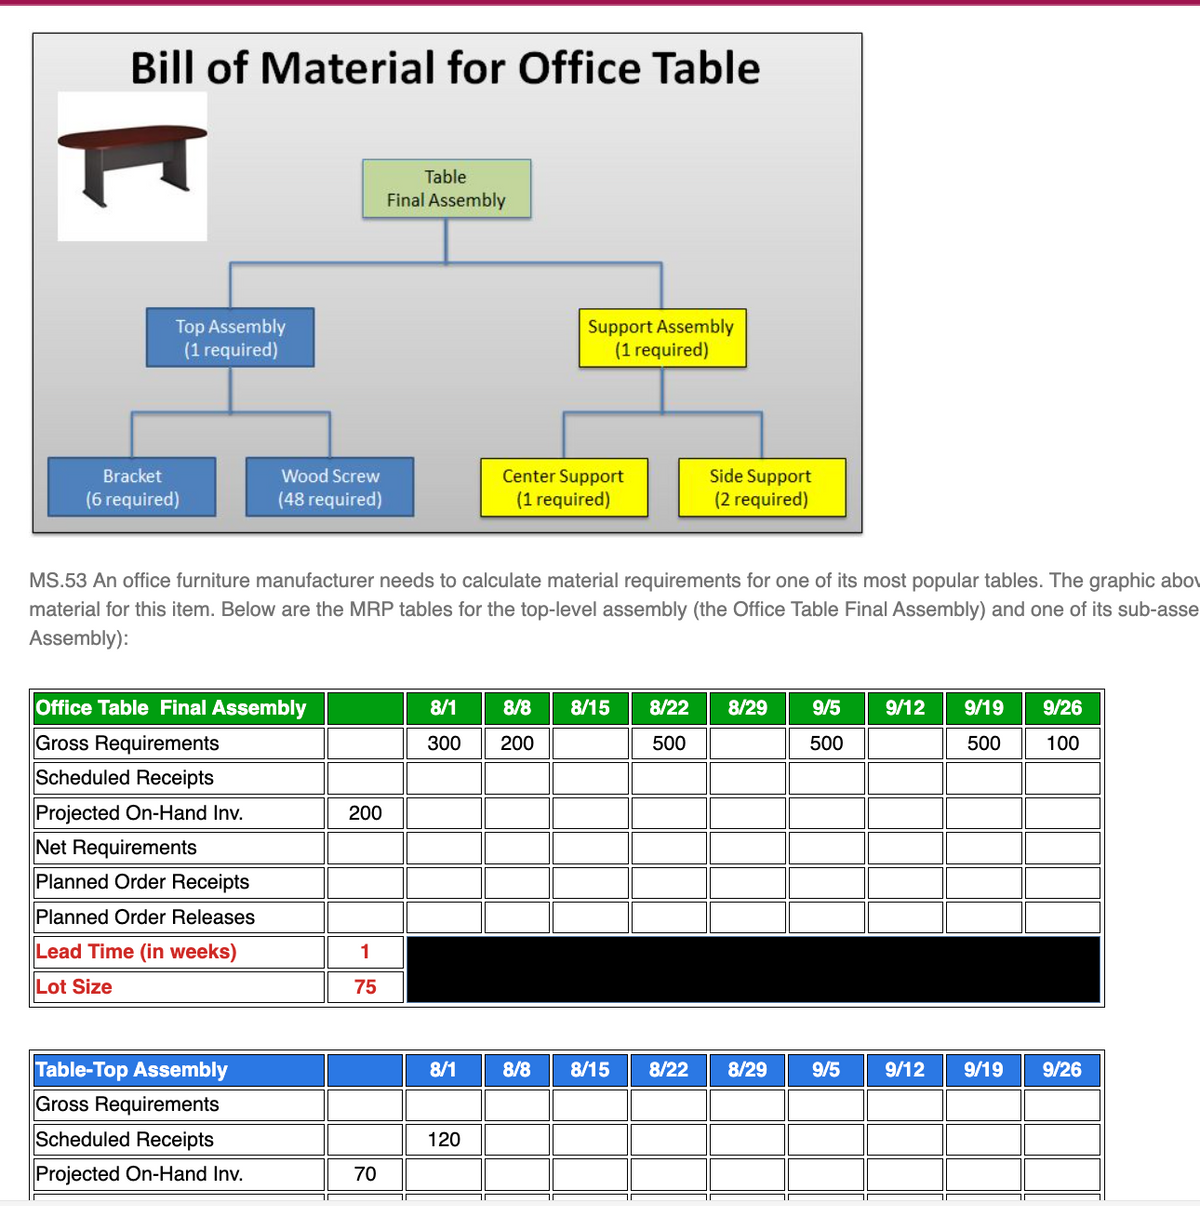 Bill of Material for Office Table
Table
Final Assembly
Top Assembly
(1 required)
Support Assembly
(1 required)
Center Support
(1 required)
Bracket
Wood Screw
Side Support
(6 required)
(48 required)
(2 required)
MS.53 An office furniture manufacturer needs to calculate material requirements for one of its most popular tables. The graphic abov
material for this item. Below are the MRP tables for the top-level assembly (the Office Table Final Assembly) and one of its sub-asse
Assembly):
Office Table Final Assembly
8/1
8/8
8/15
8/22
8/29
9/5
9/12
9/19
9/26
Gross Requirements
300
200
500
500
500
100
Scheduled Receipts
ojected On-Hand Inv.
200
Net Requirements
Planned Order Receipts
Planned Order Releases
Lead Time (in weeks)
1
Lot Size
75
Table-Top Assembly
8/1
8/8
8/15
8/22
8/29
9/5
9/12
9/19
9/26
Gross Requirements
Scheduled Receipts
120
Projected On-Hand Inv.
70
